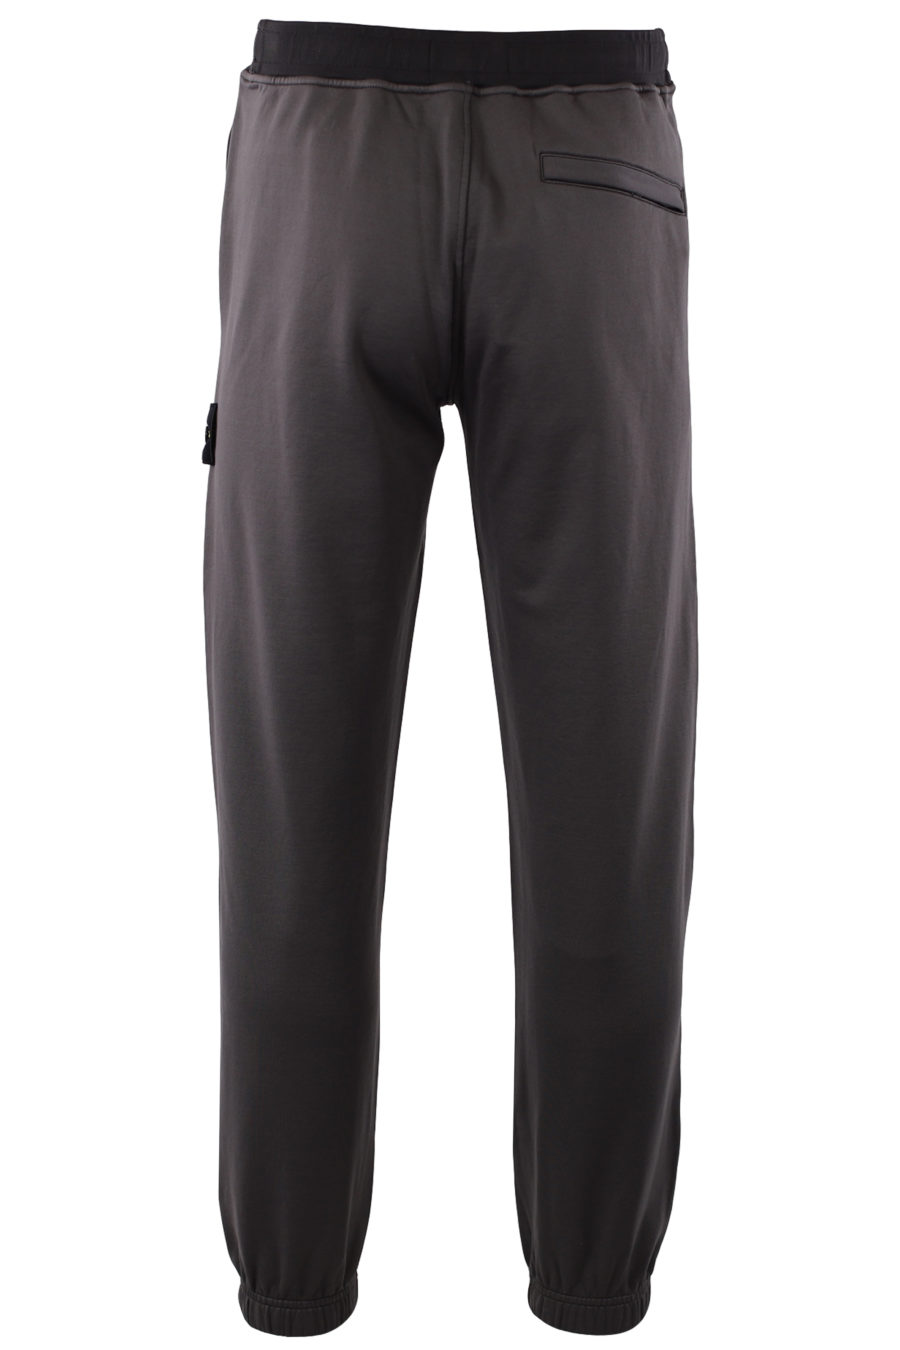 Metallic grey trousers with logo patch - IMG 9174